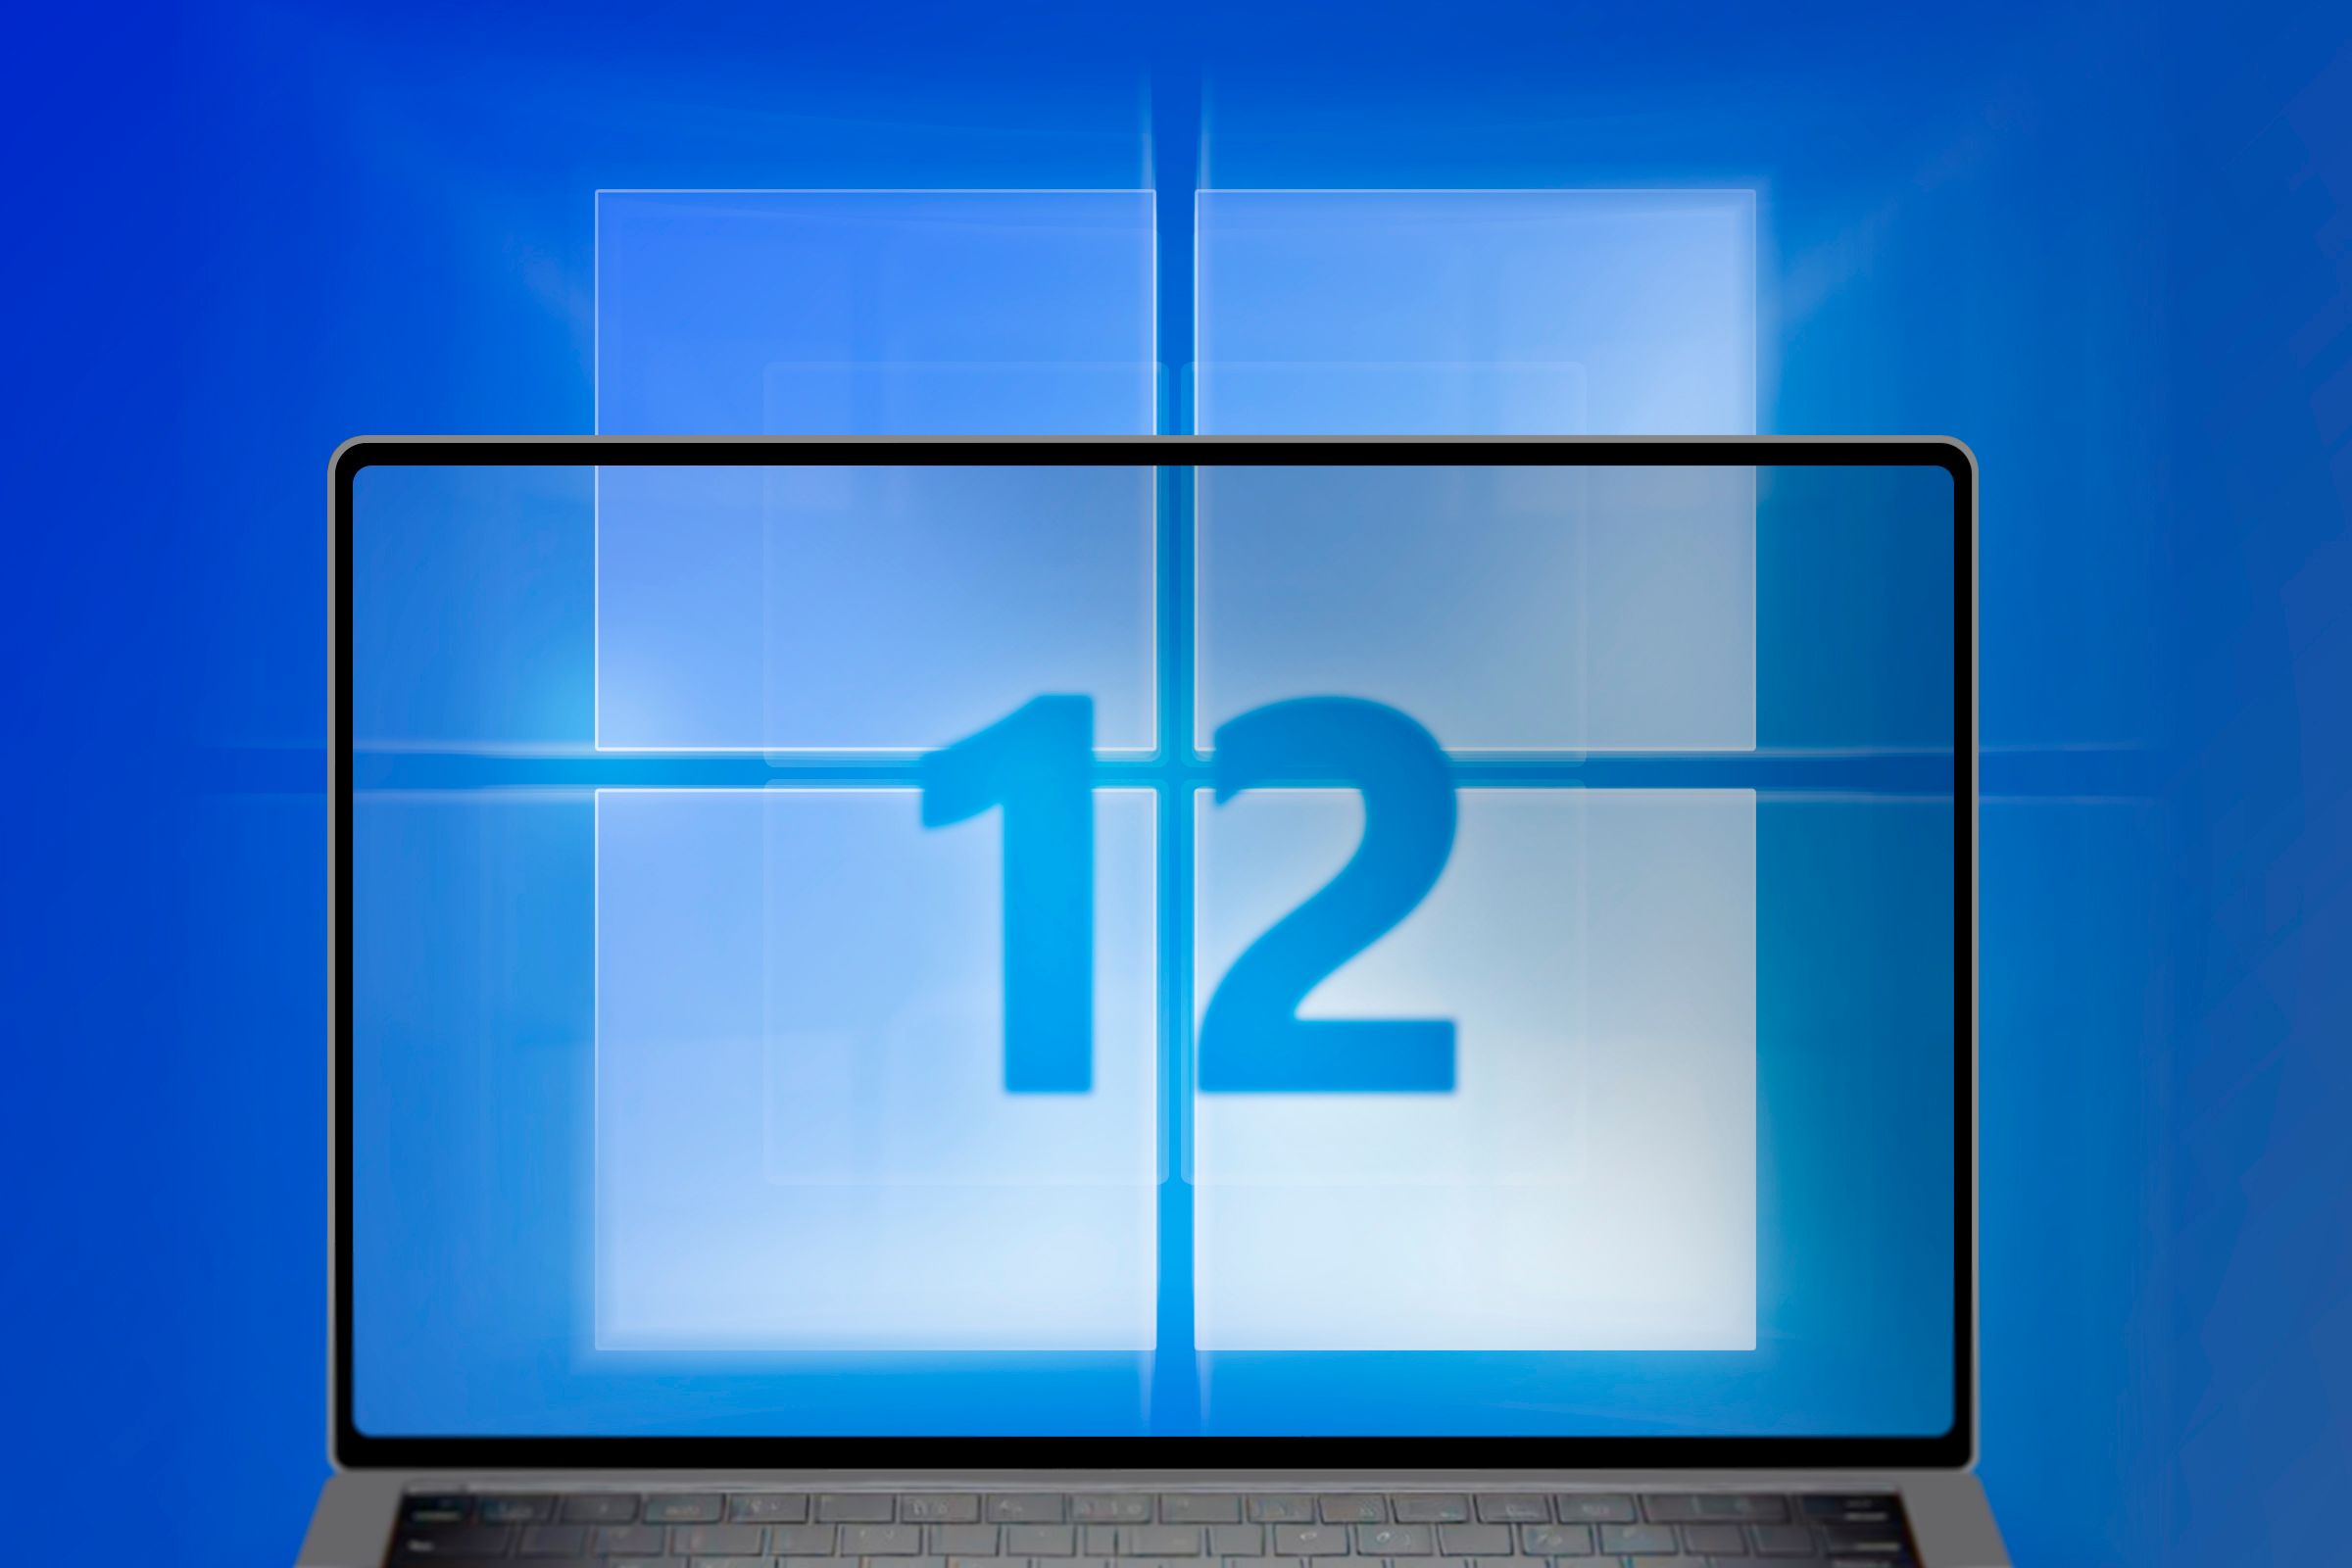 A laptop screen displaying a logo associated with Windows 12.